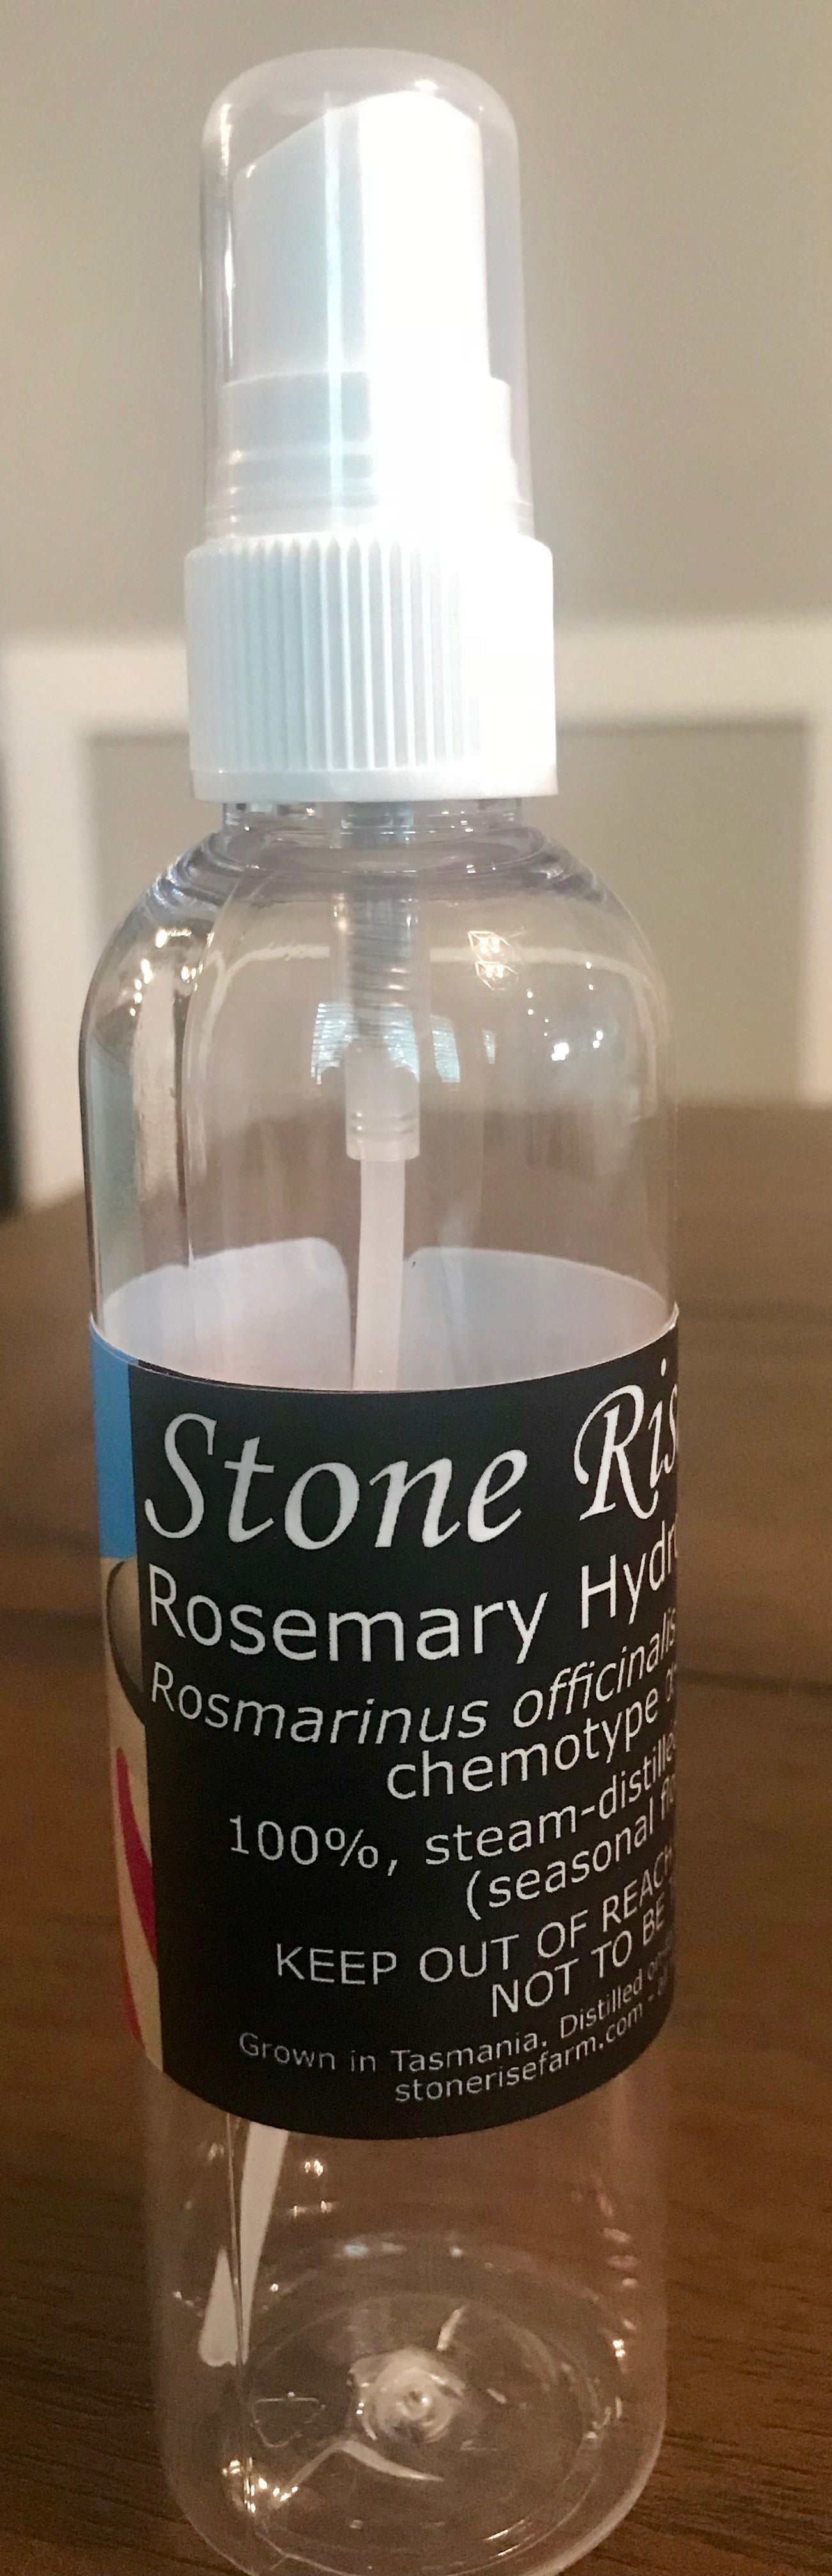 Stone Rise Farm Rosemary Bundle  - "Herb Cottage" Rosemary 5ml and 100 ml